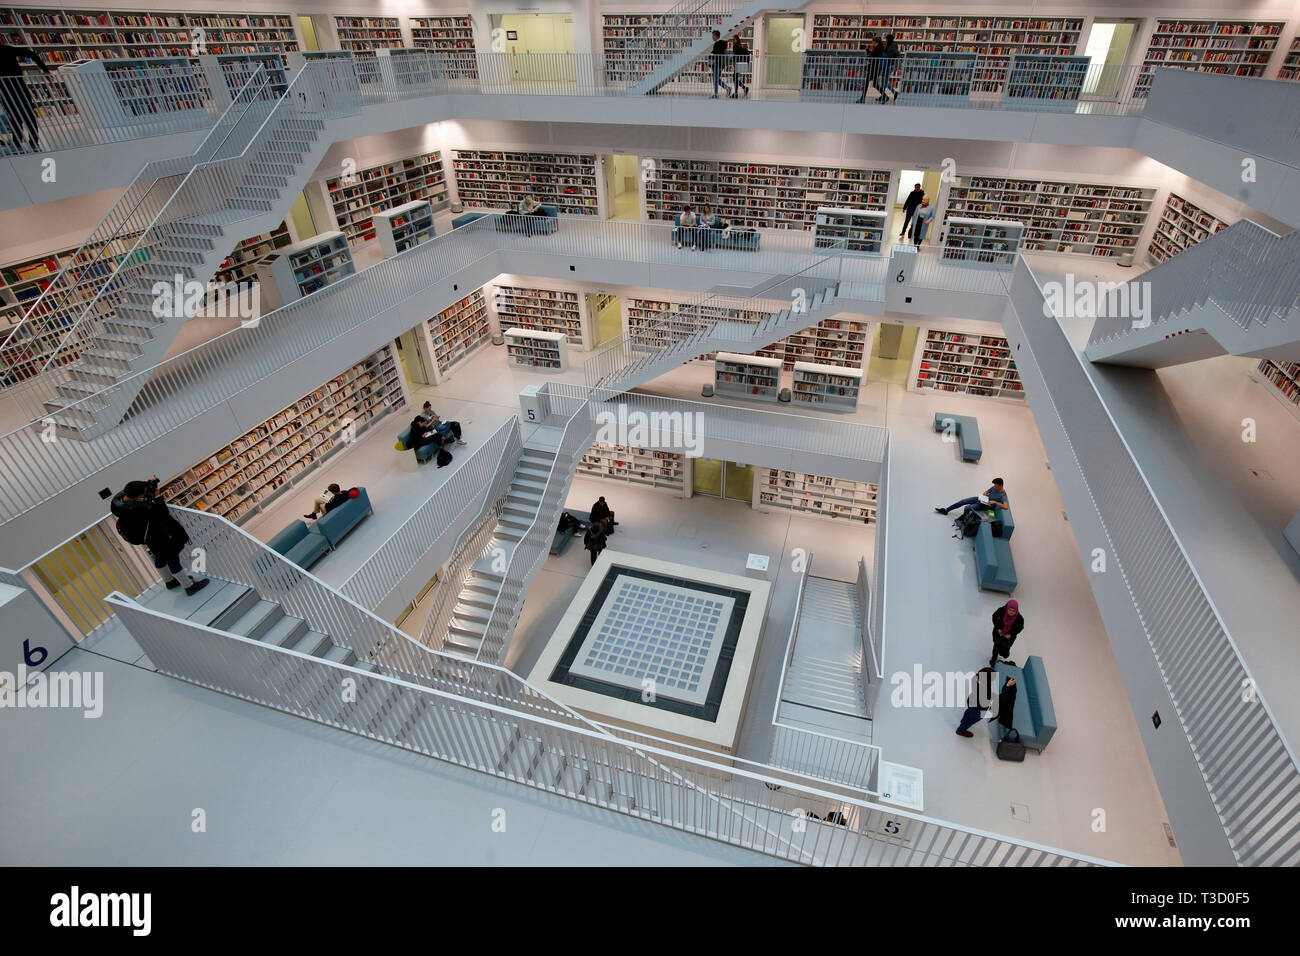 Stadtbibliothek High Resolution Stock Photography and Images - Alamy